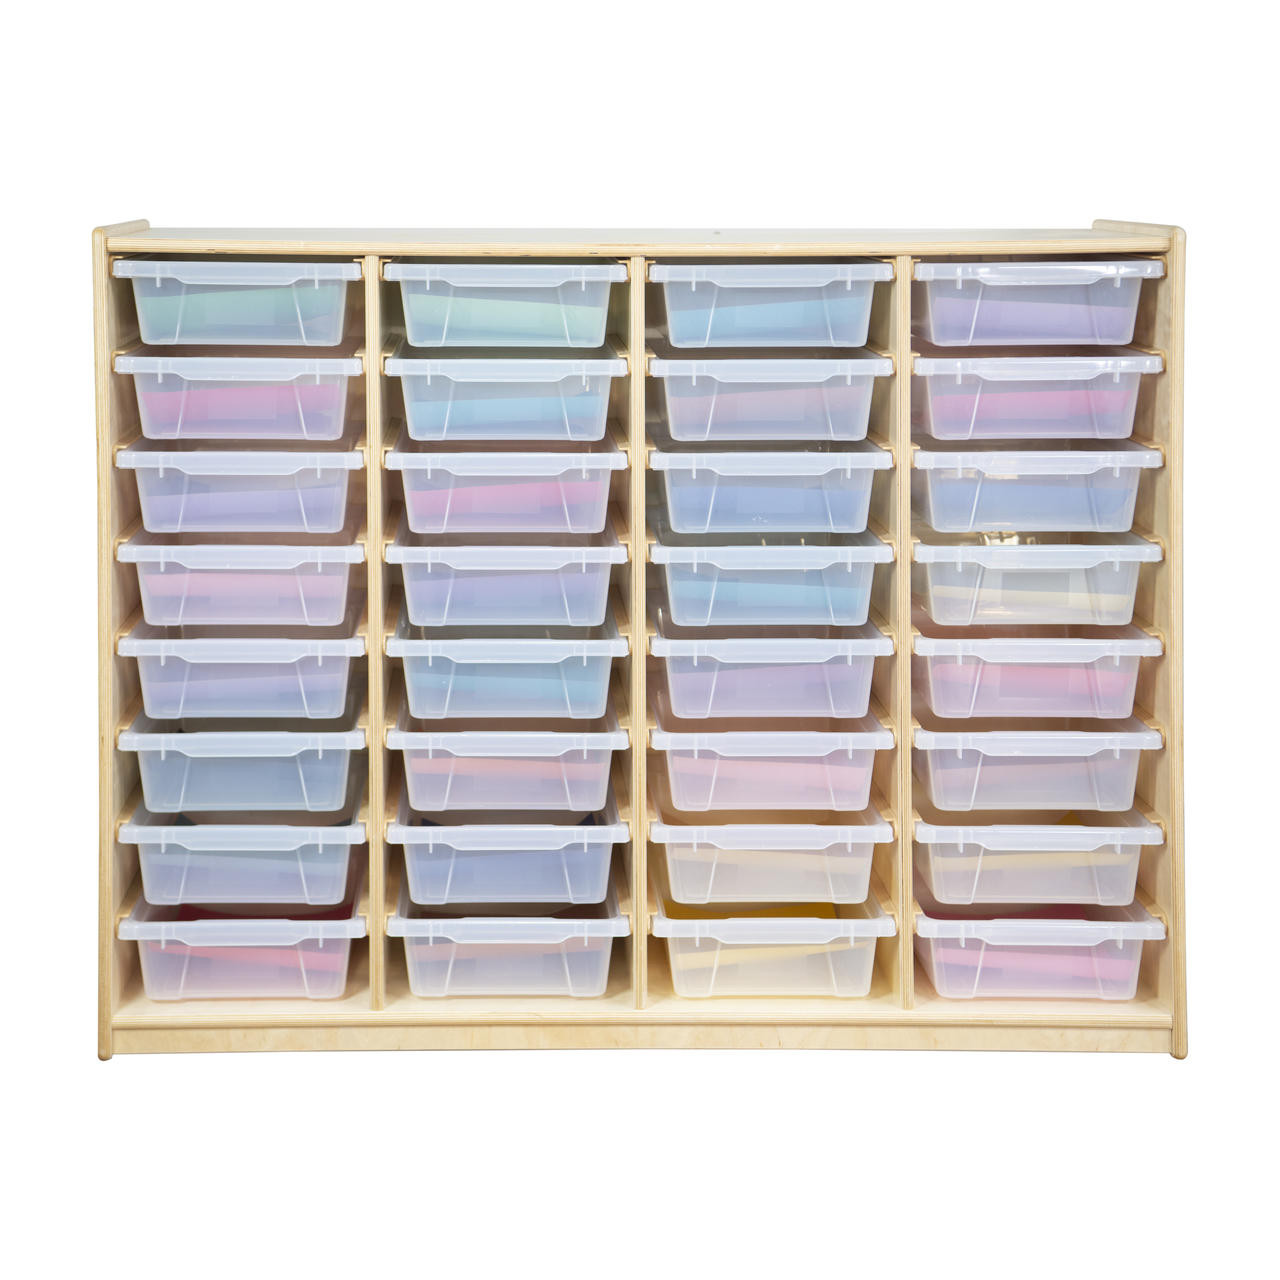 Wood Designs 79001-HALF Translucent Letter Tray, Clear - Set of 20